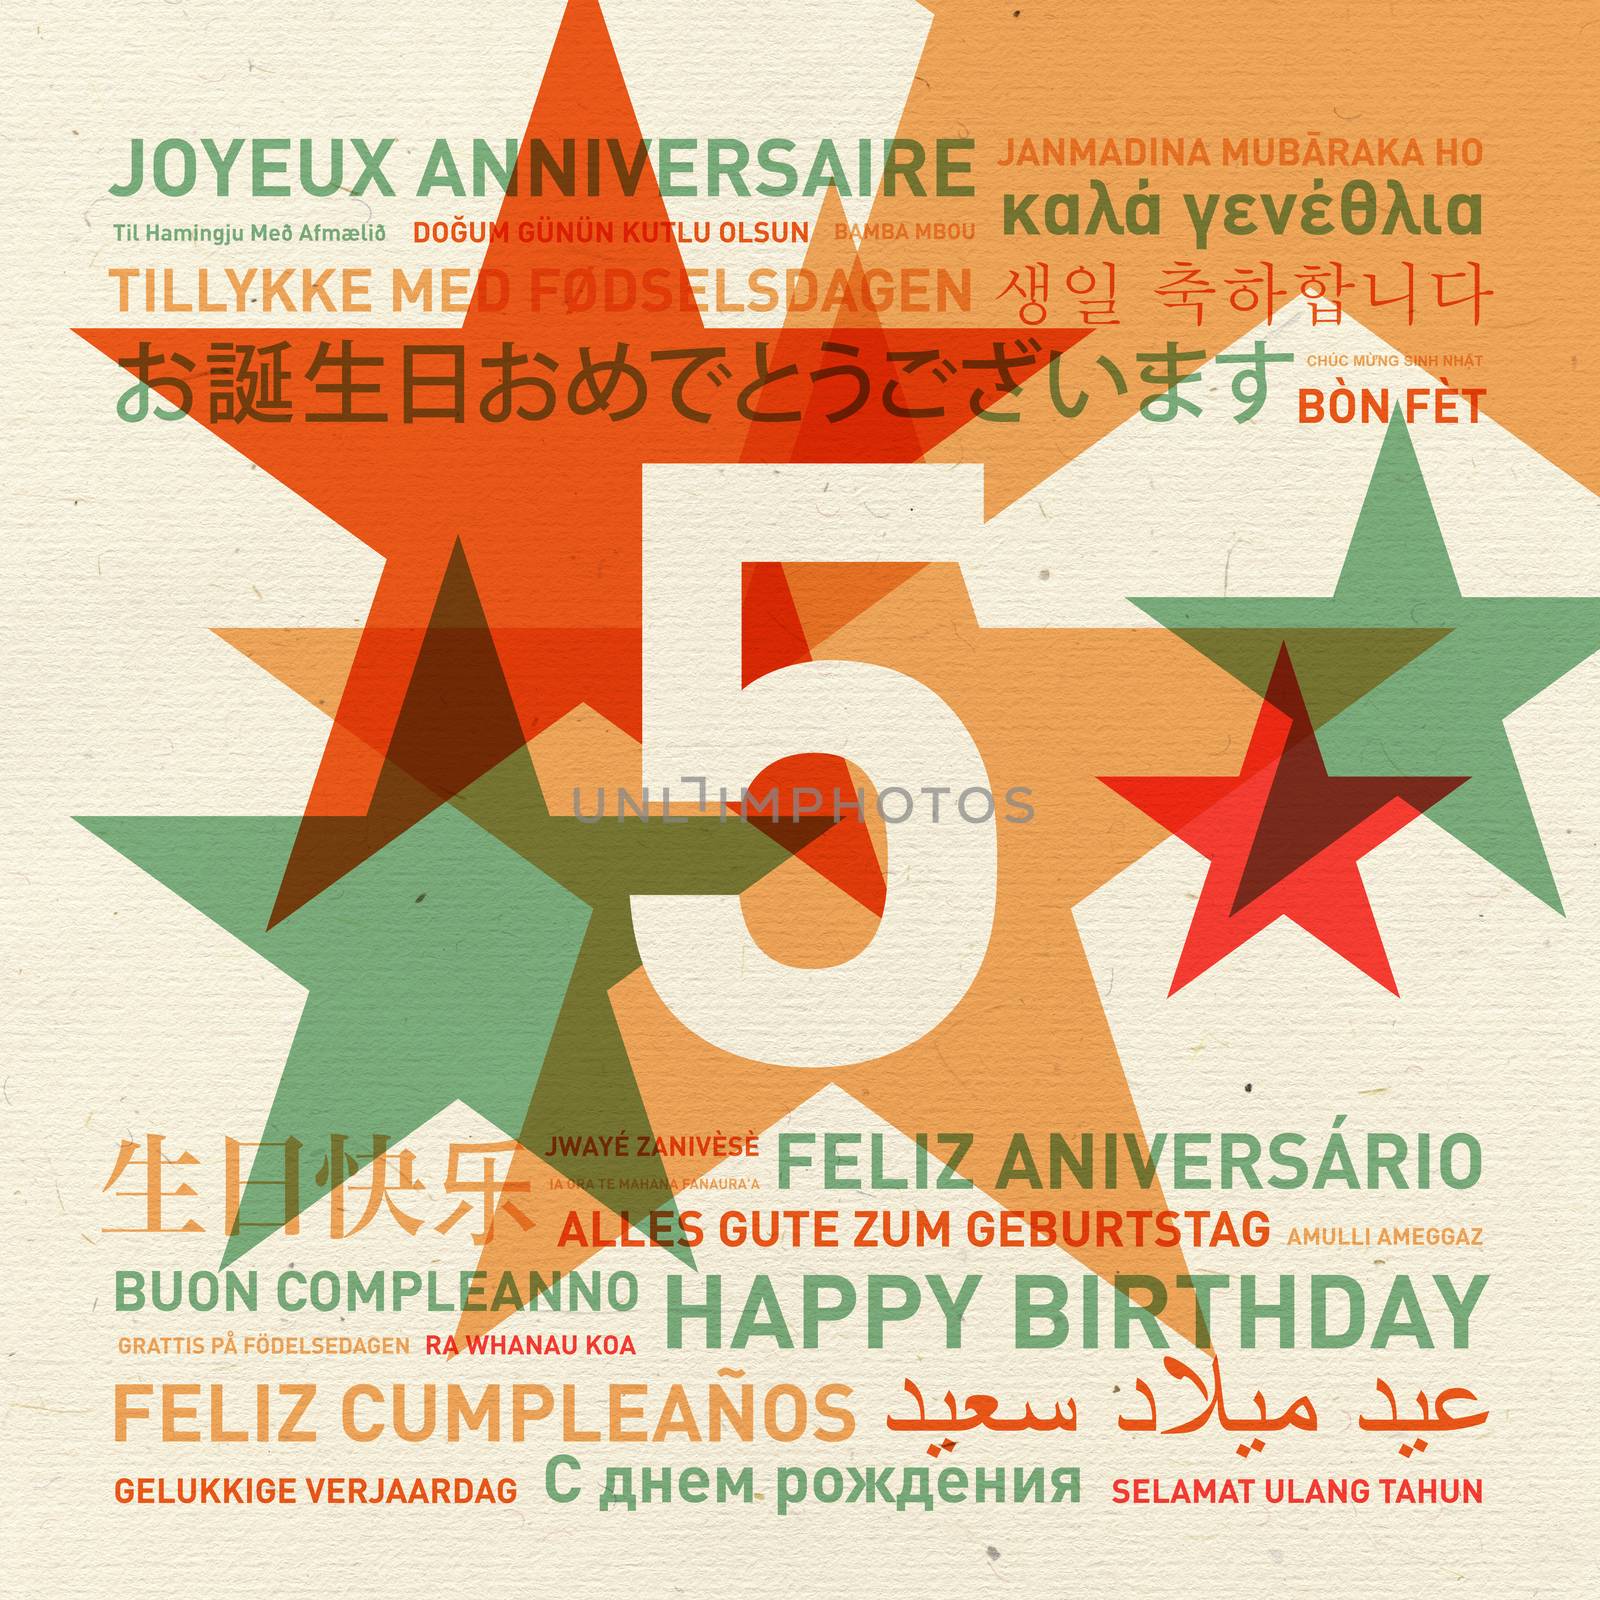 5th anniversary happy birthday from the world. Different languages celebration card